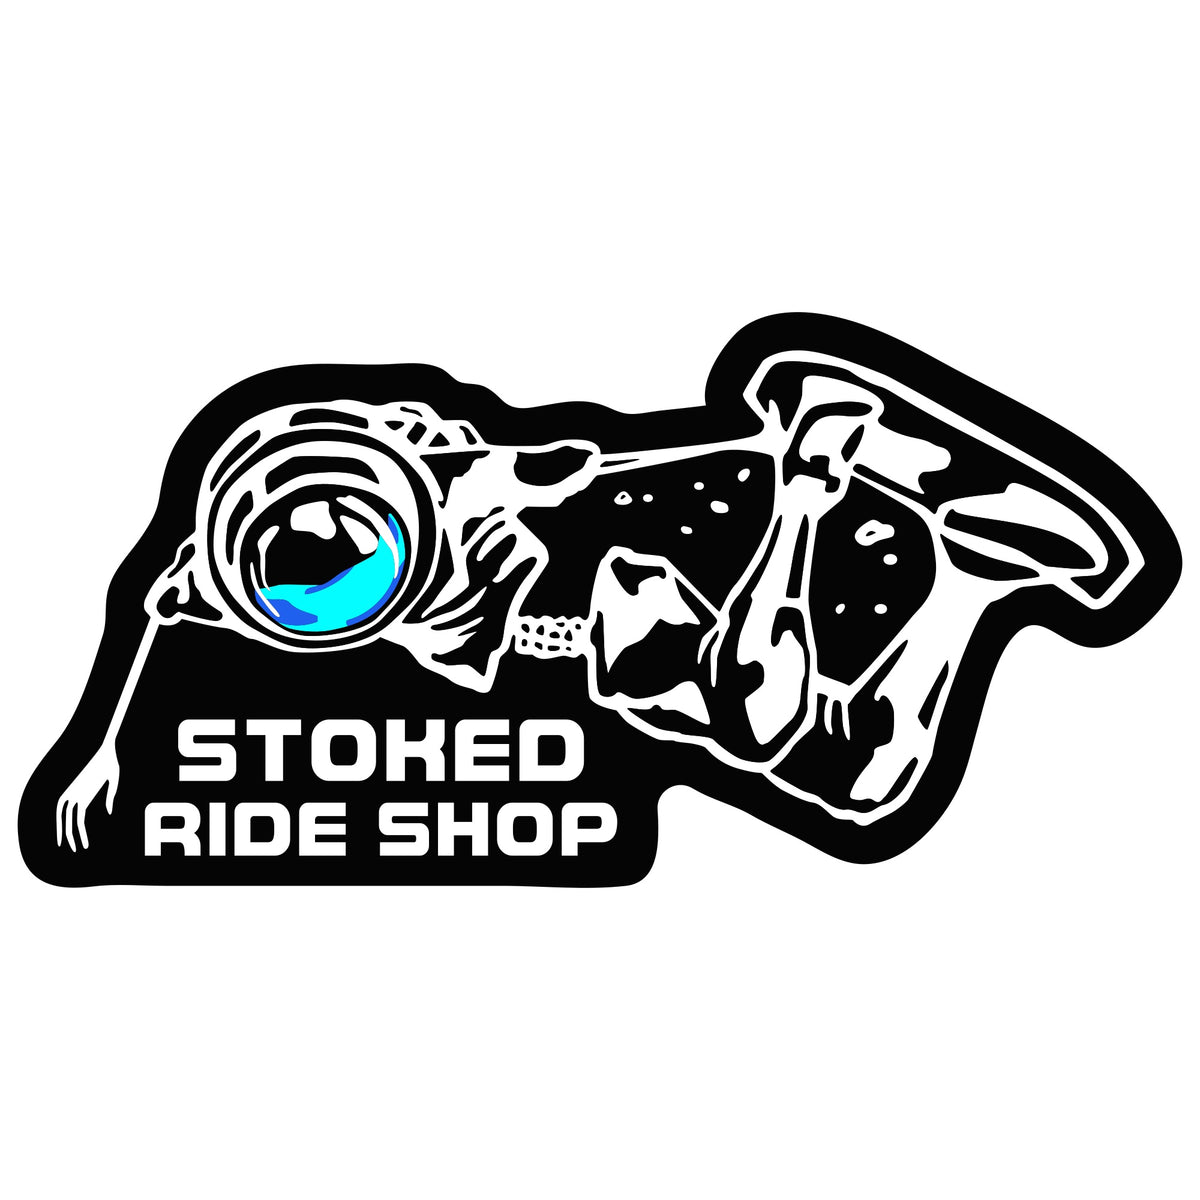 Stoked Ride Shop Space Man Sticker Series #4